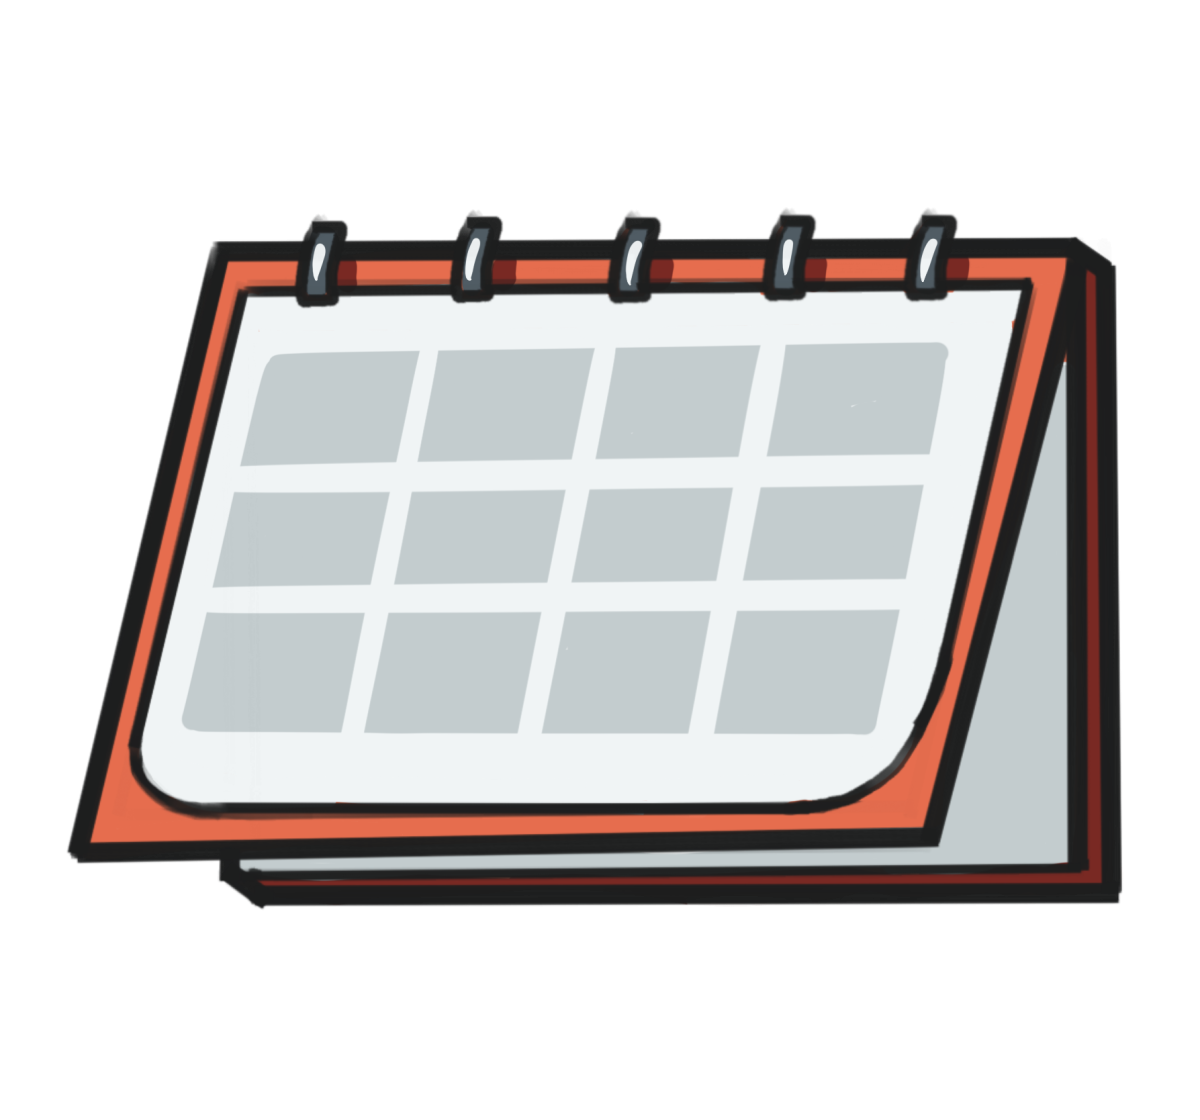 Keeping track of your assignments and their due dates with a calendar or agenda is essential to getting all your work in on time.